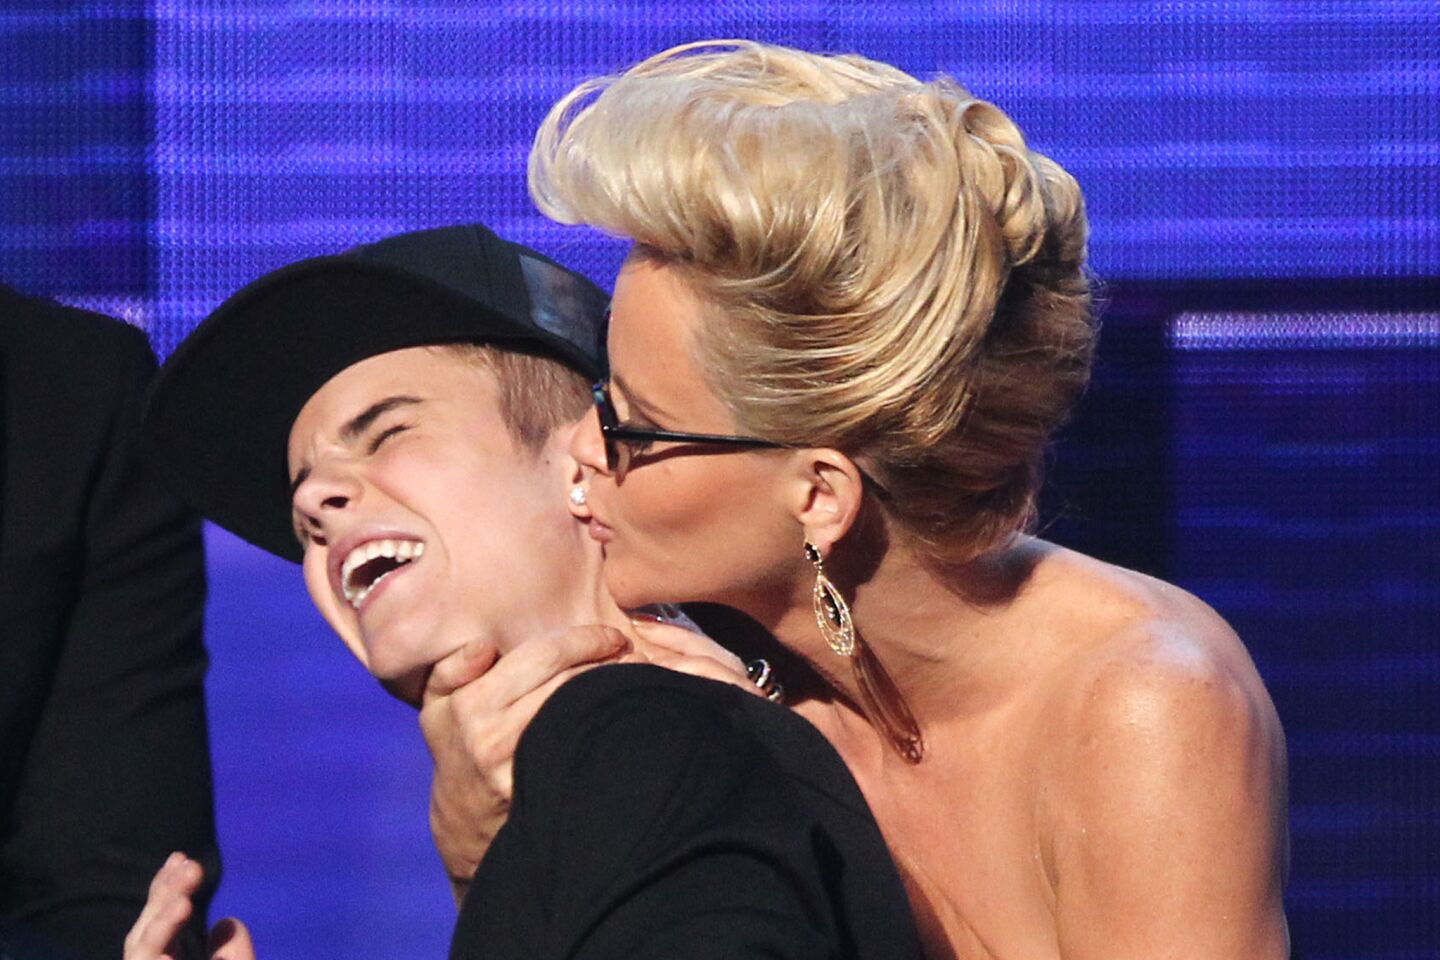 McCarthy plants a kiss on teen heartthrob Justin Bieber at the 2012 American Music Awards. By this time, she had a few relationships that didn't last very long: one with Boston-based sports agent Paul Krepelka and another with Chicago Bears linebacker Brian Urlacher.